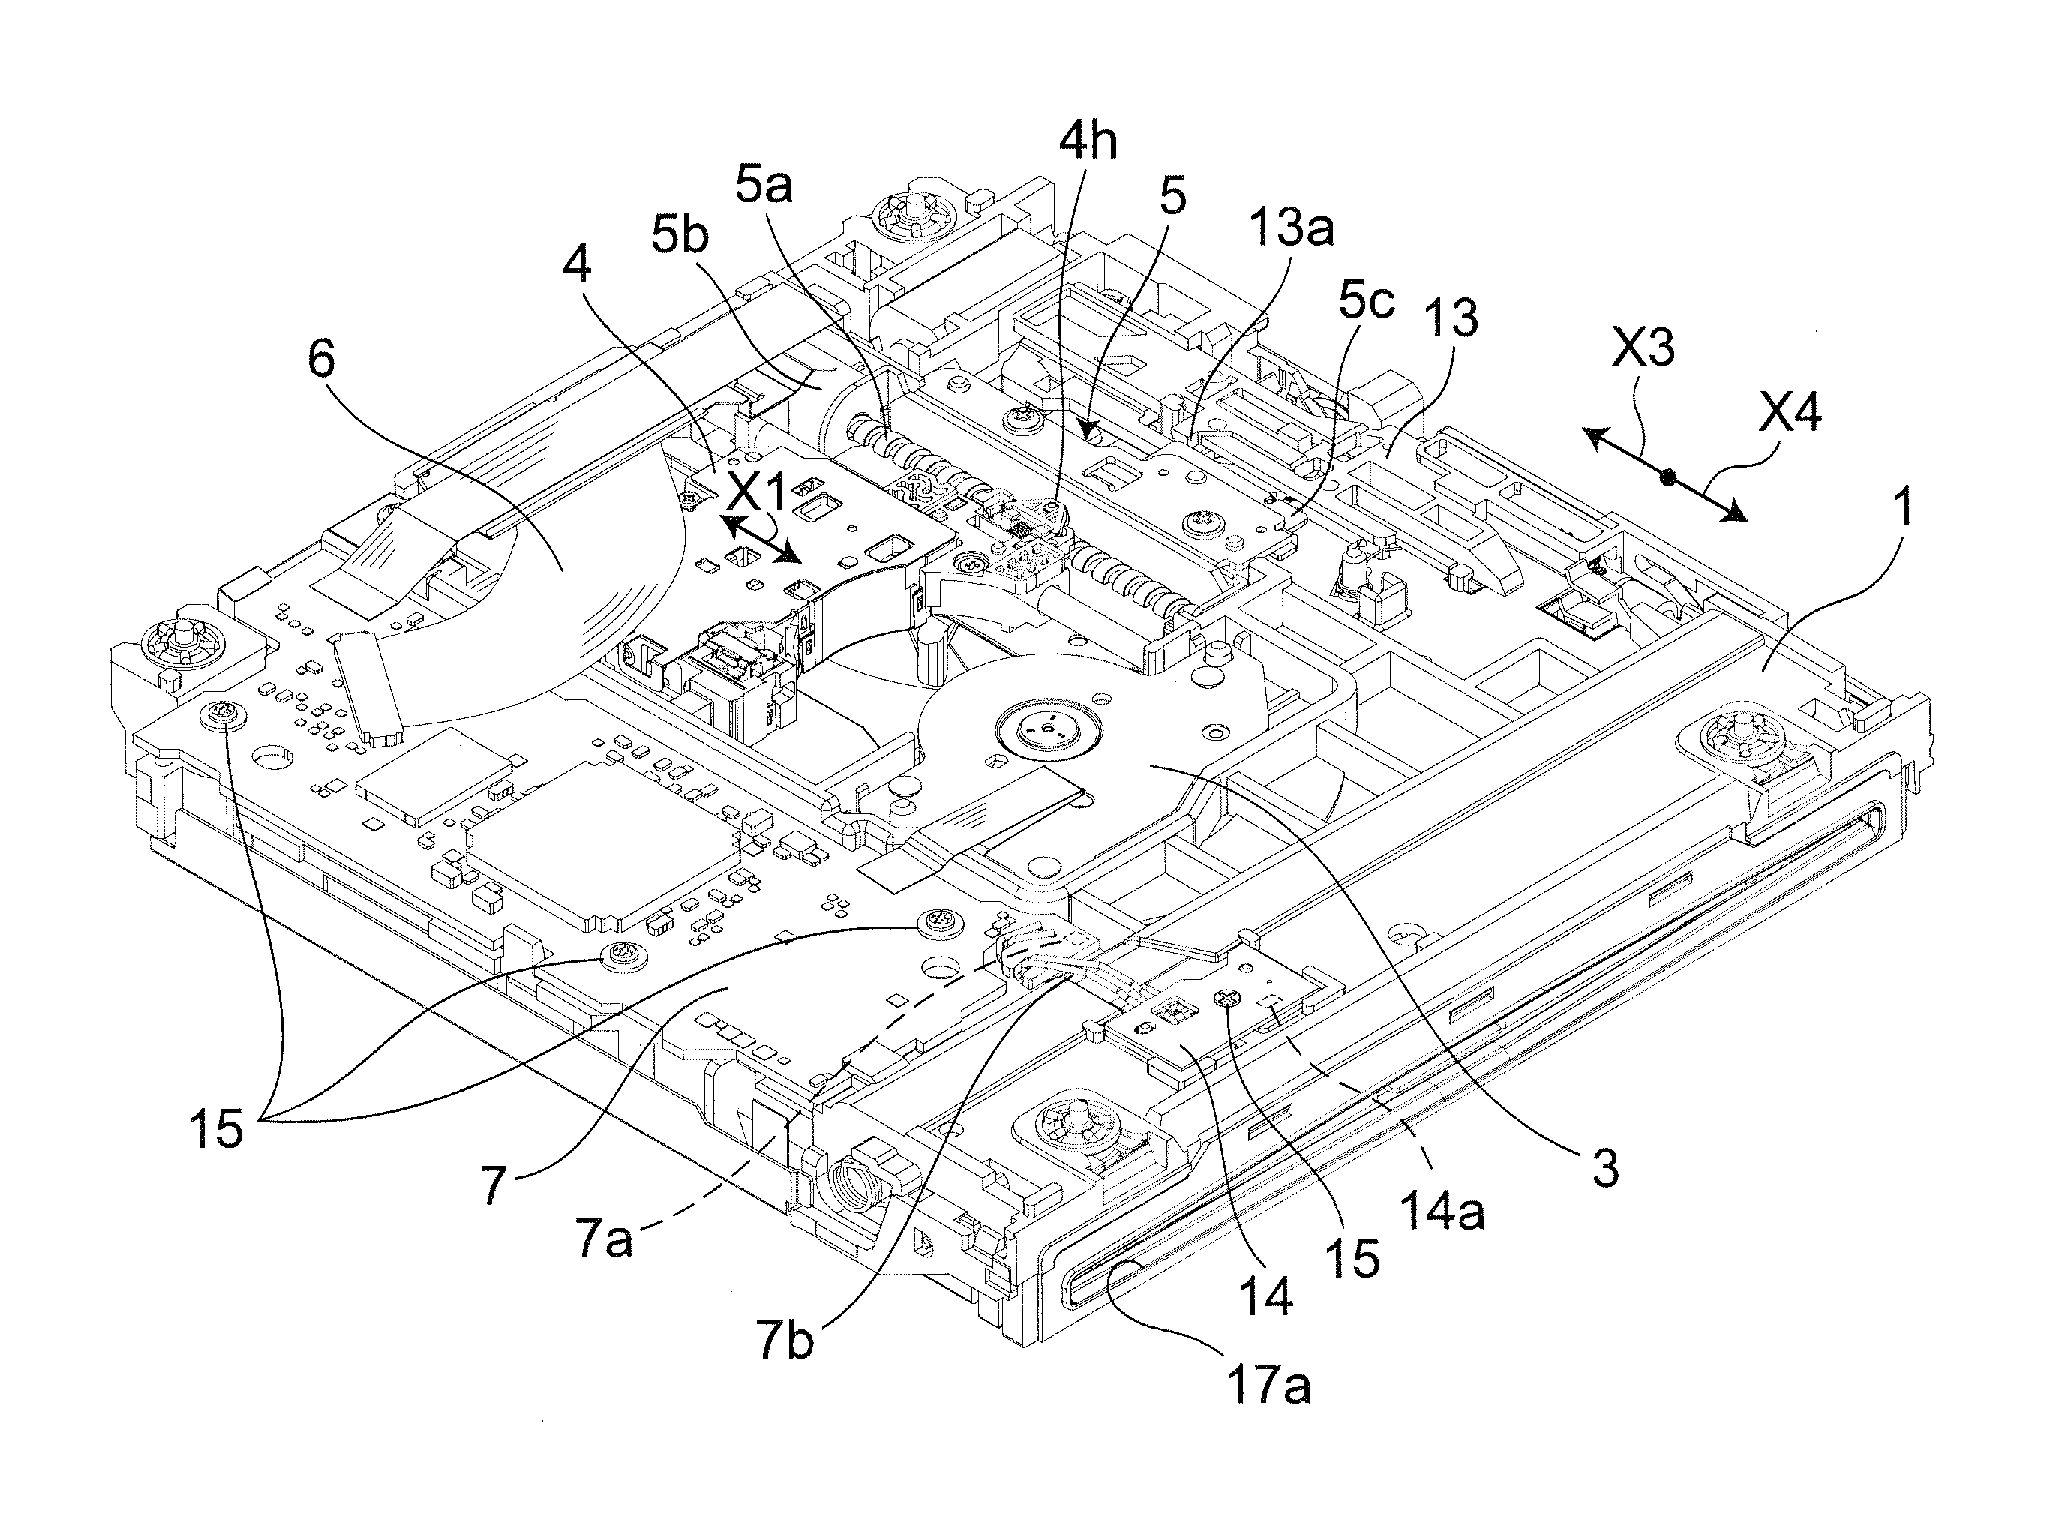 Lens cleaner and optical disc device